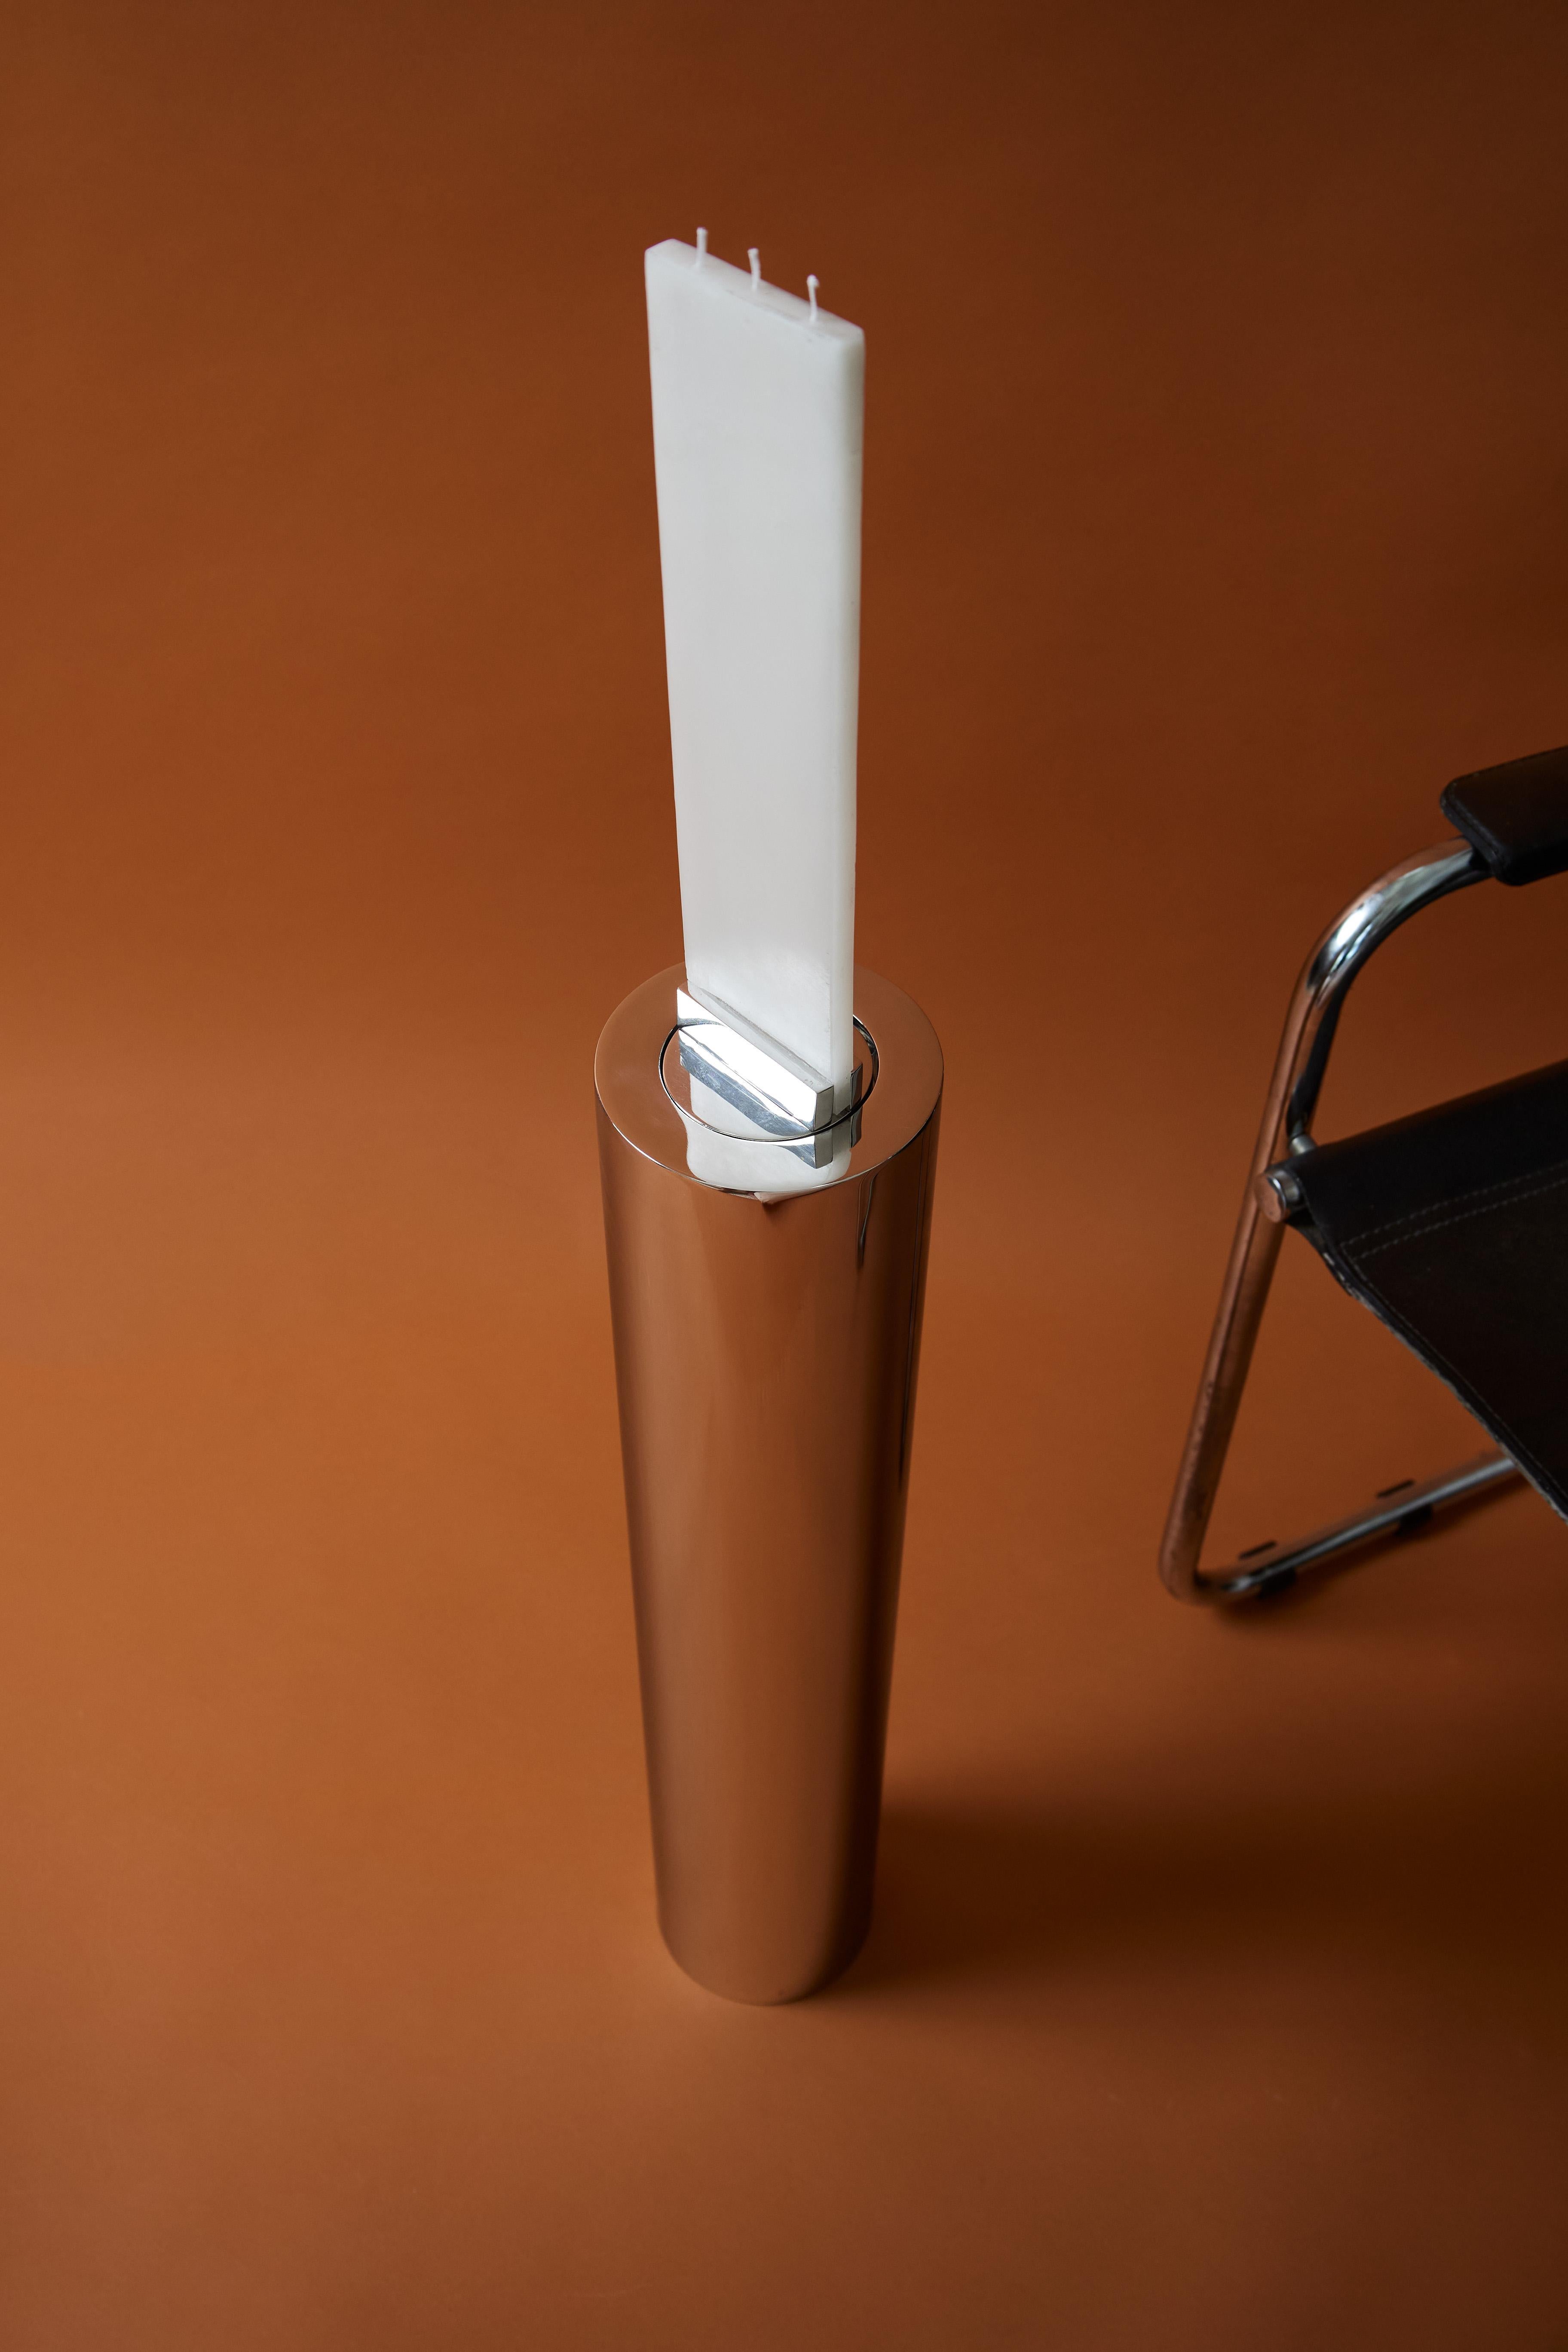 J D Candle Holder Stainless Steel by Nish Studio
Dimensions: D13 x H 70 cm 
Materials: polish stainless steel

N I S H is a Cape Town based Fashion and Furniture design studio. N I S H creates contemporary, elegant and progressive designs that